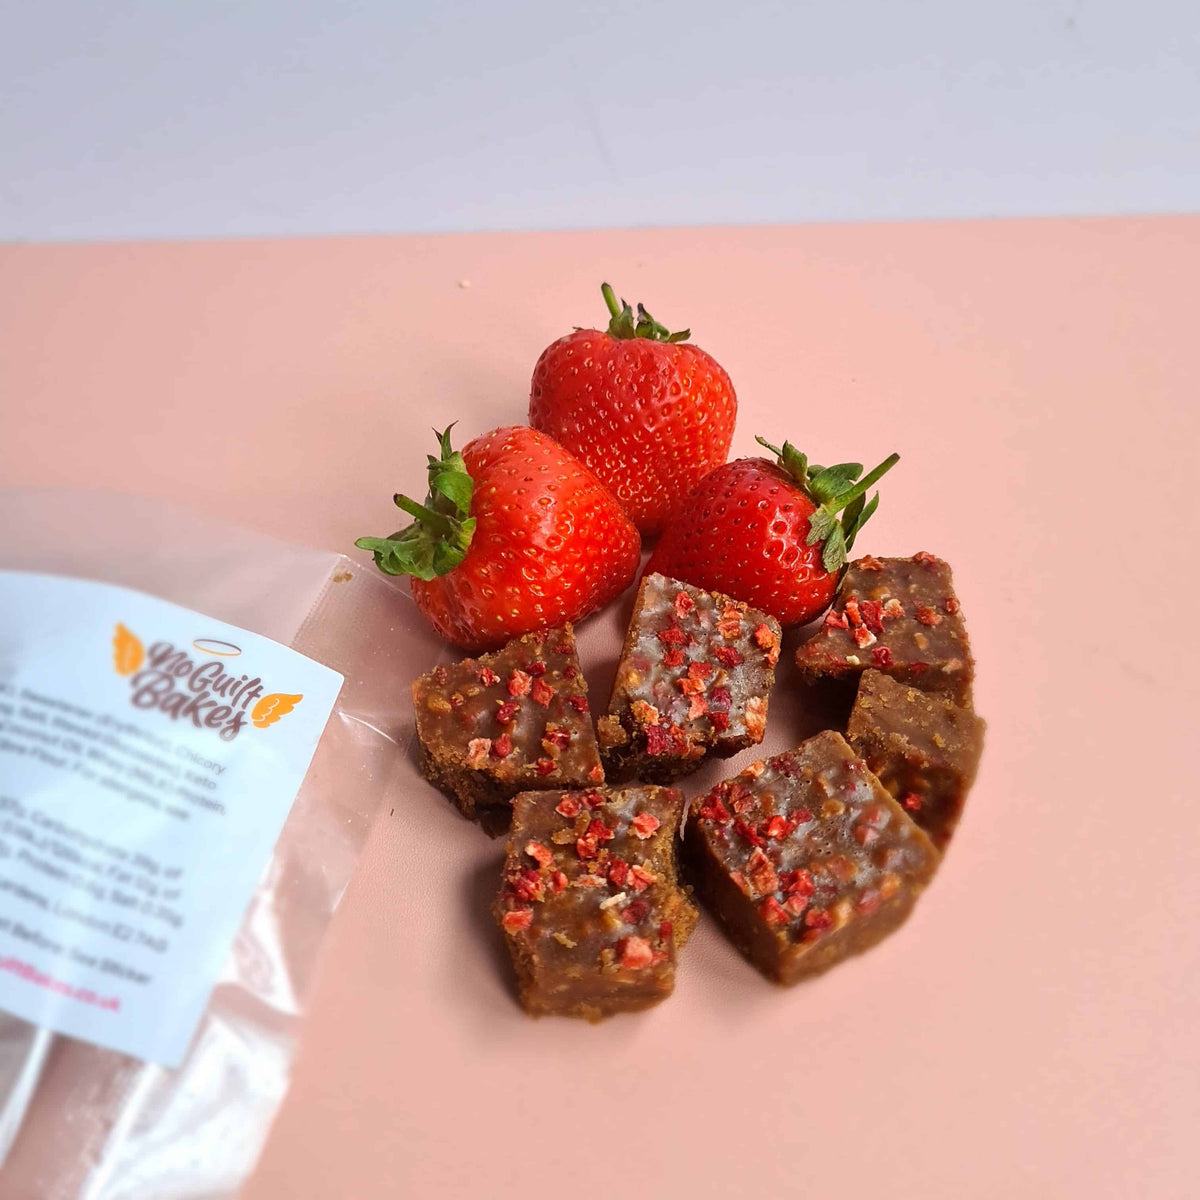 An ultimate sweet treat trio featuring a bag of No Guilt Bakes Keto Fudge Bundle and a bag of Belgian Caramel Keto Fudge, topped with fresh strawberries.